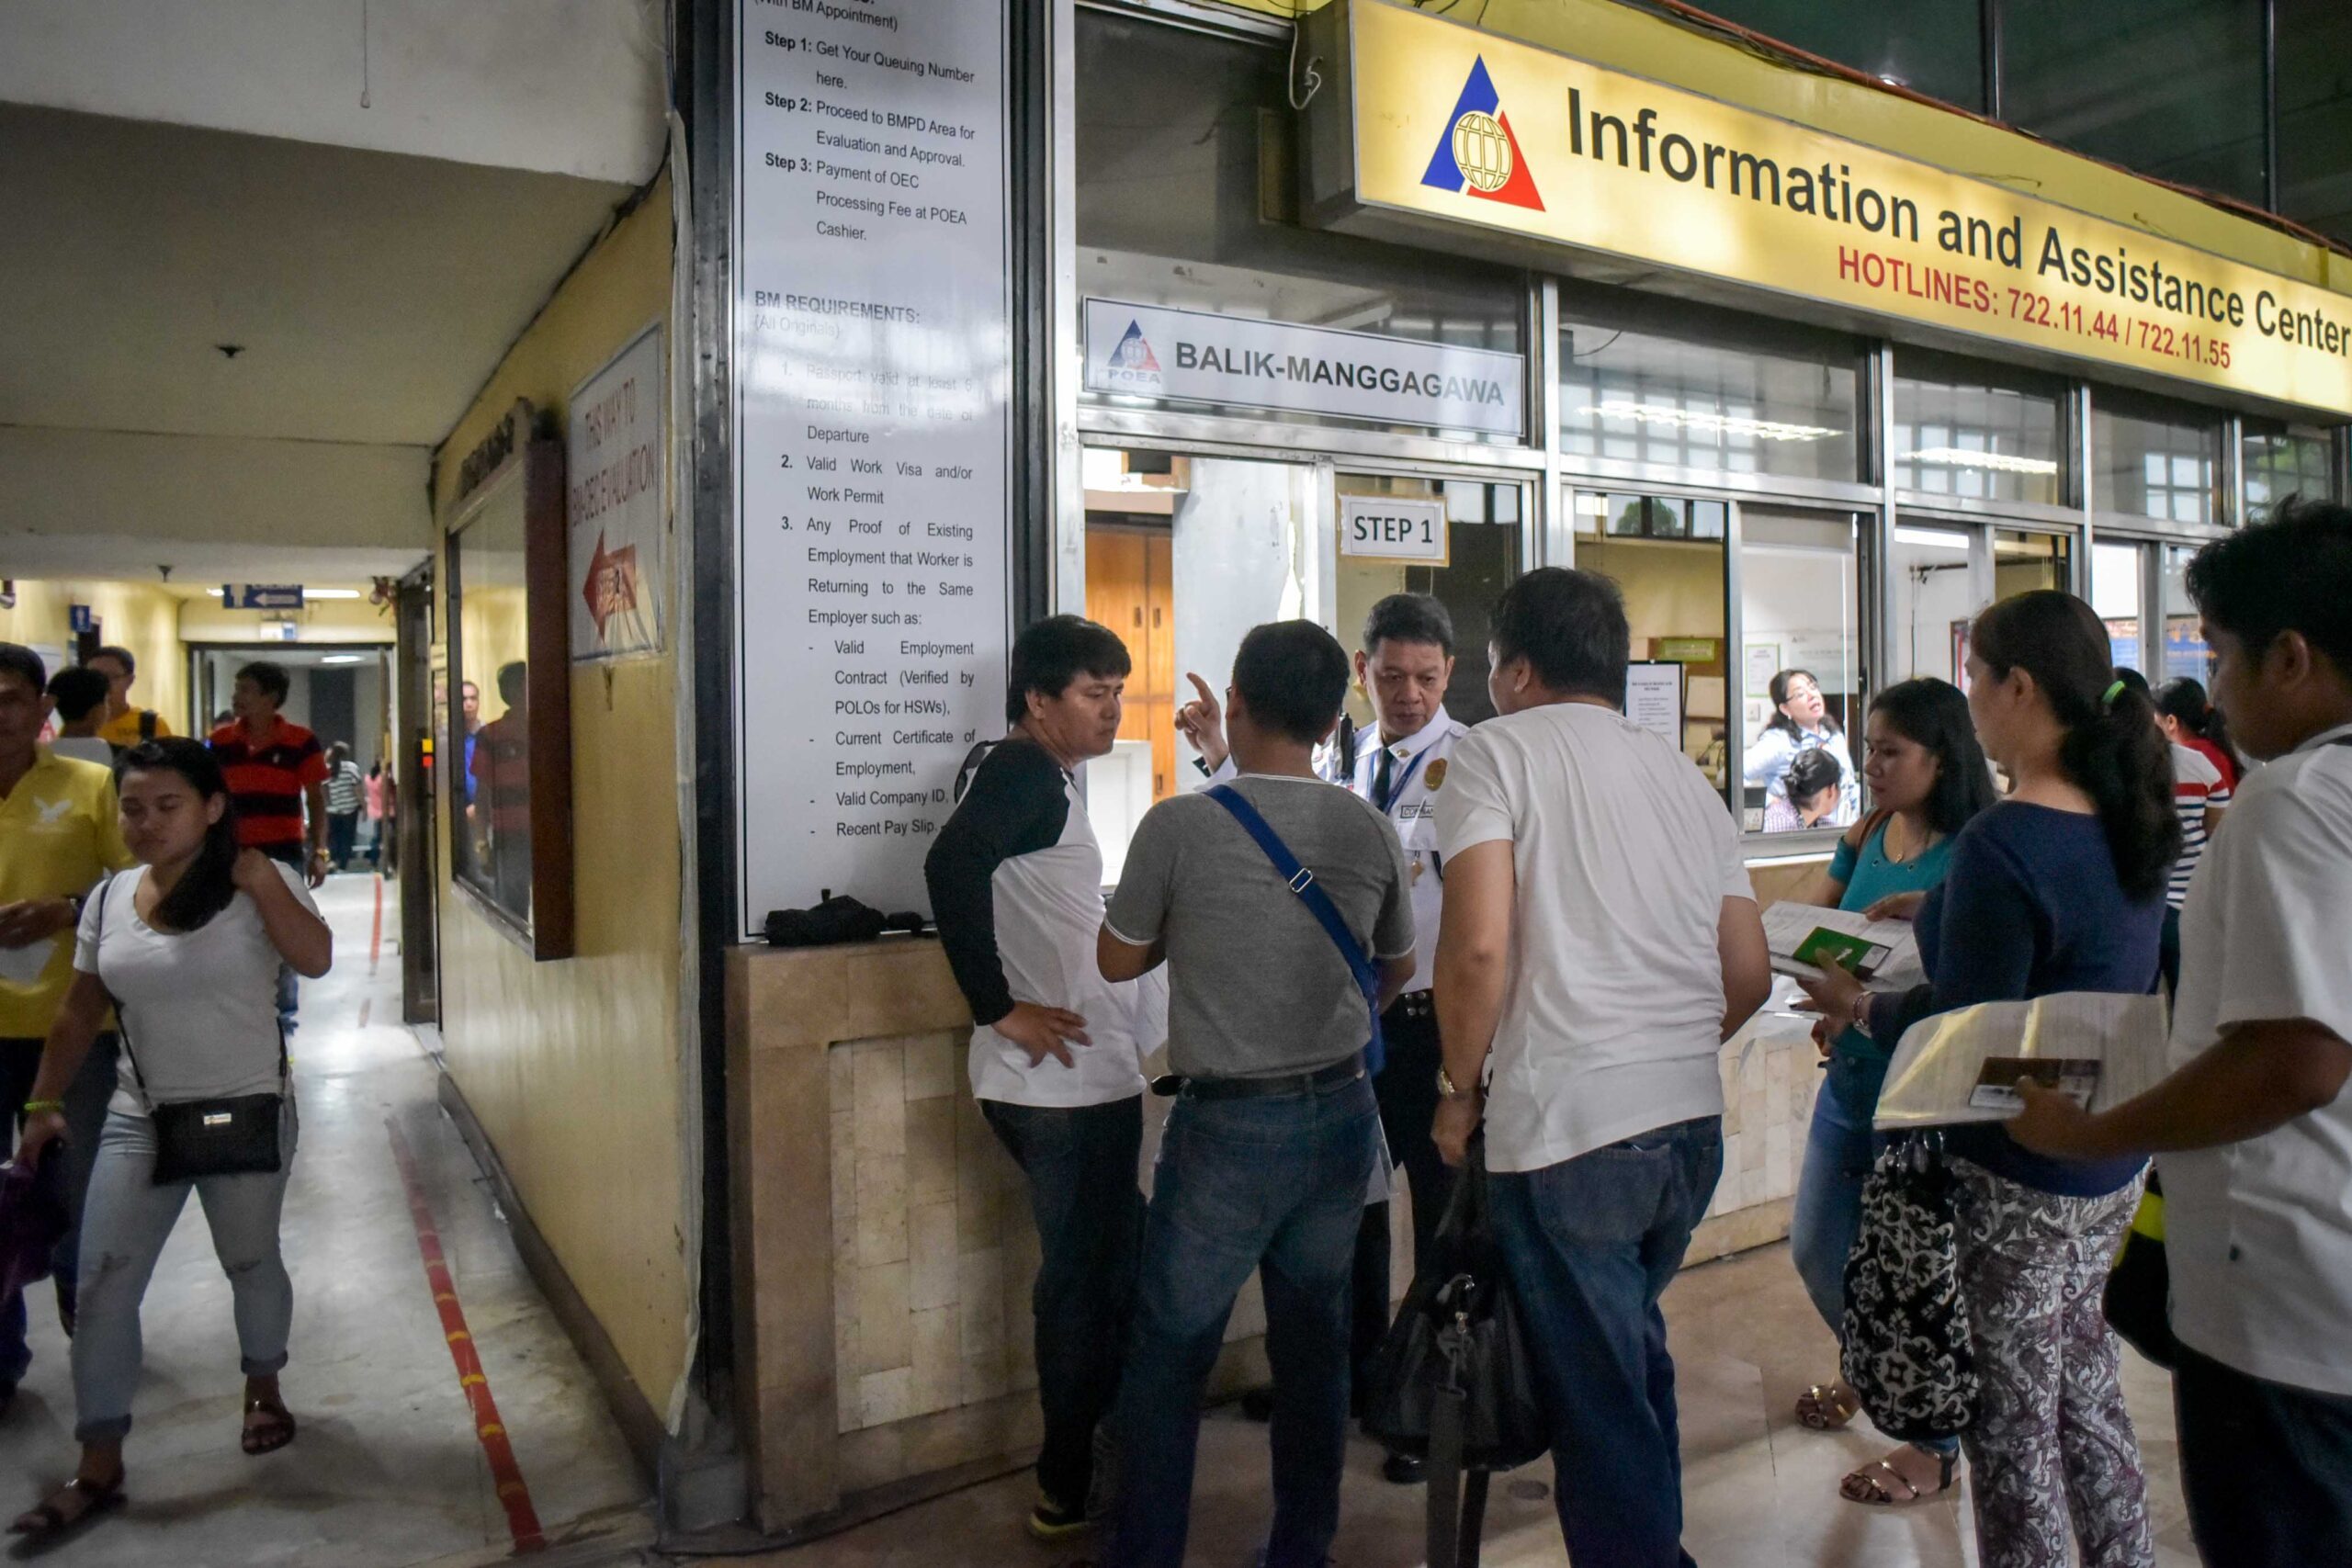 Are zero placement fees for OFWs scam or solution?